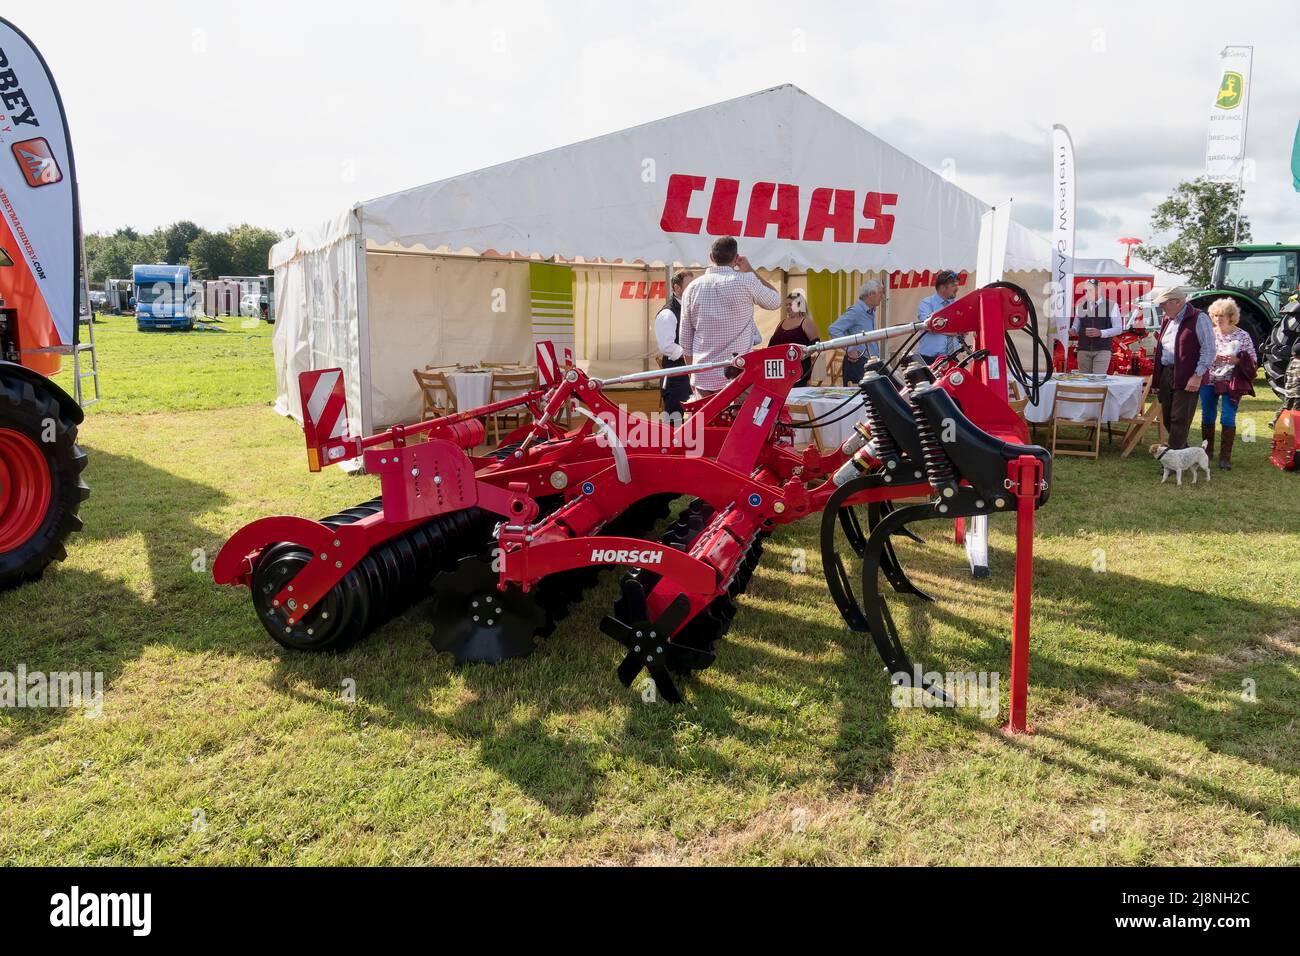 Frome, Somerset, UK - September 11 2021: The CLAAS Agricultural Machinery manufacturer trade stand at the 2021 Frome Agricultural and Cheese Show Stock Photo